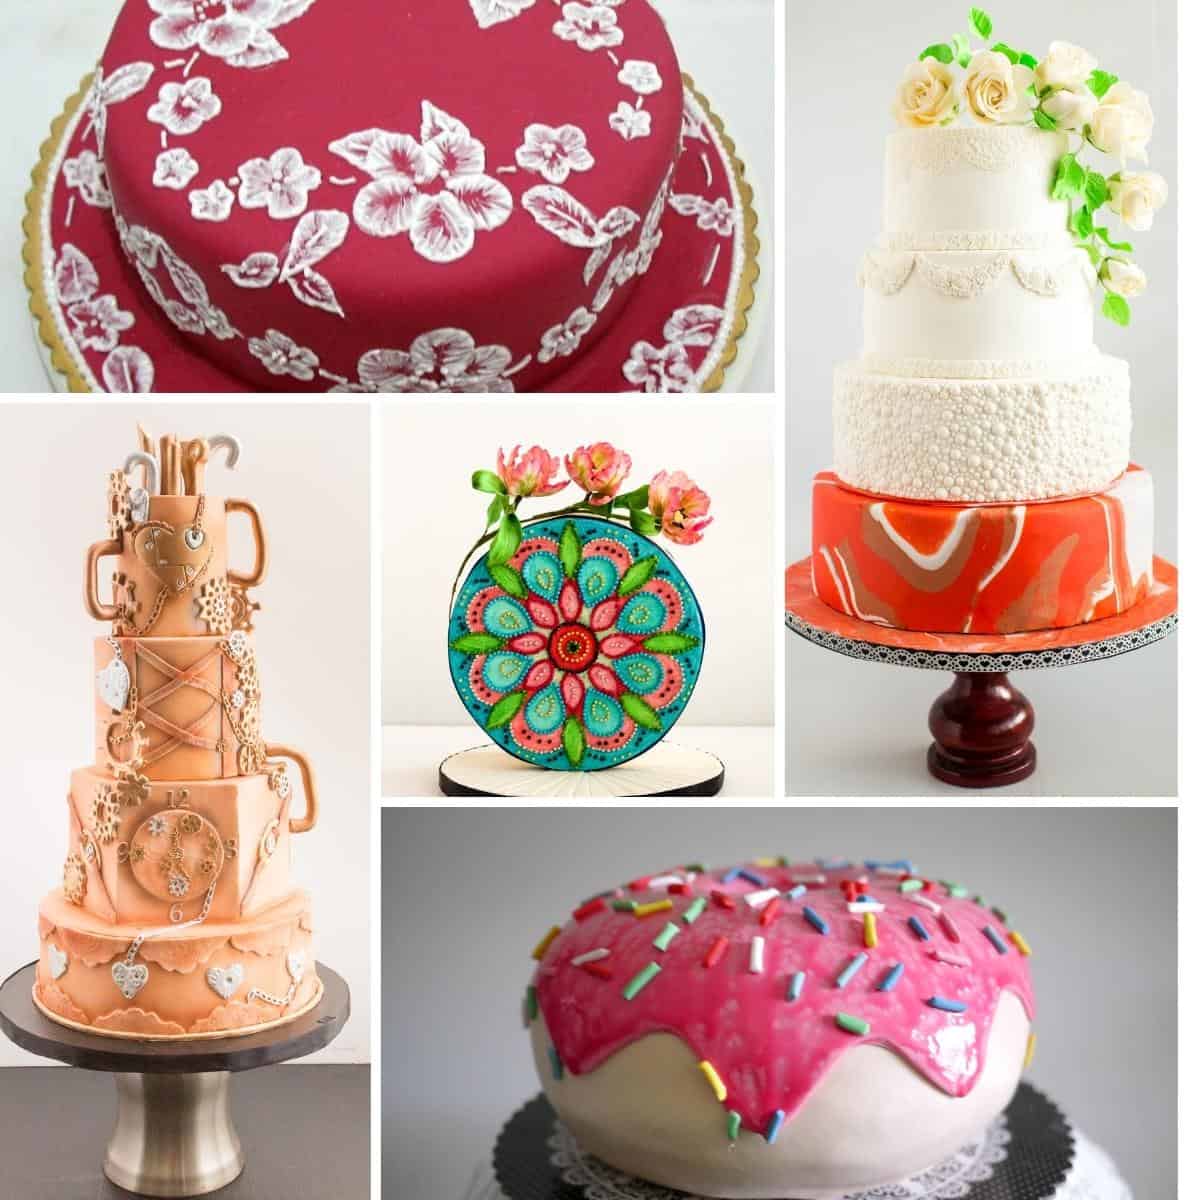 Time Management of an effective Cake Decorator